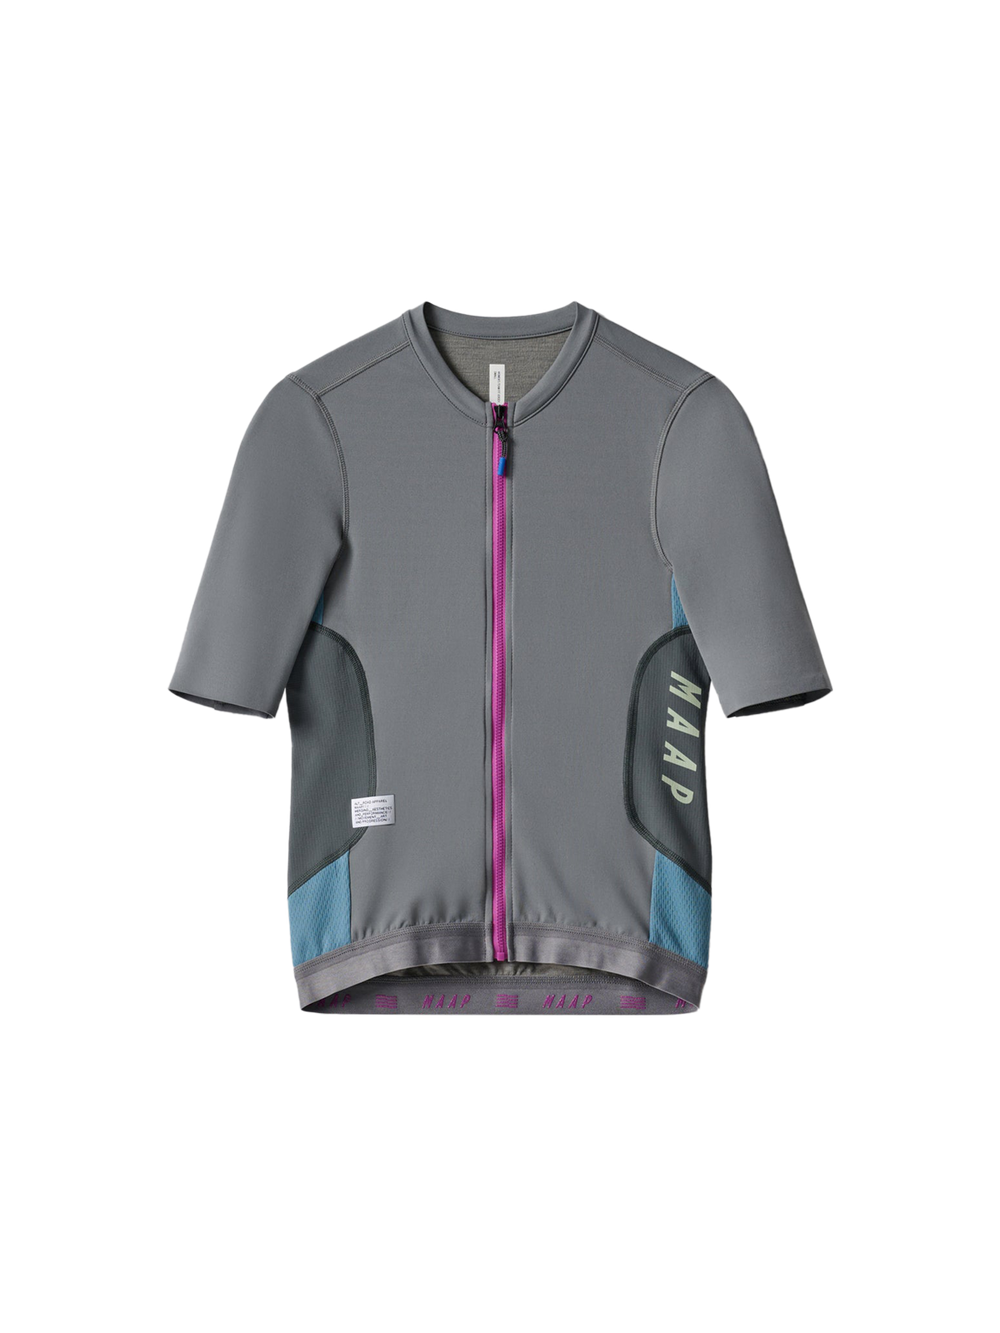 Product Image for Alt_Road Jersey